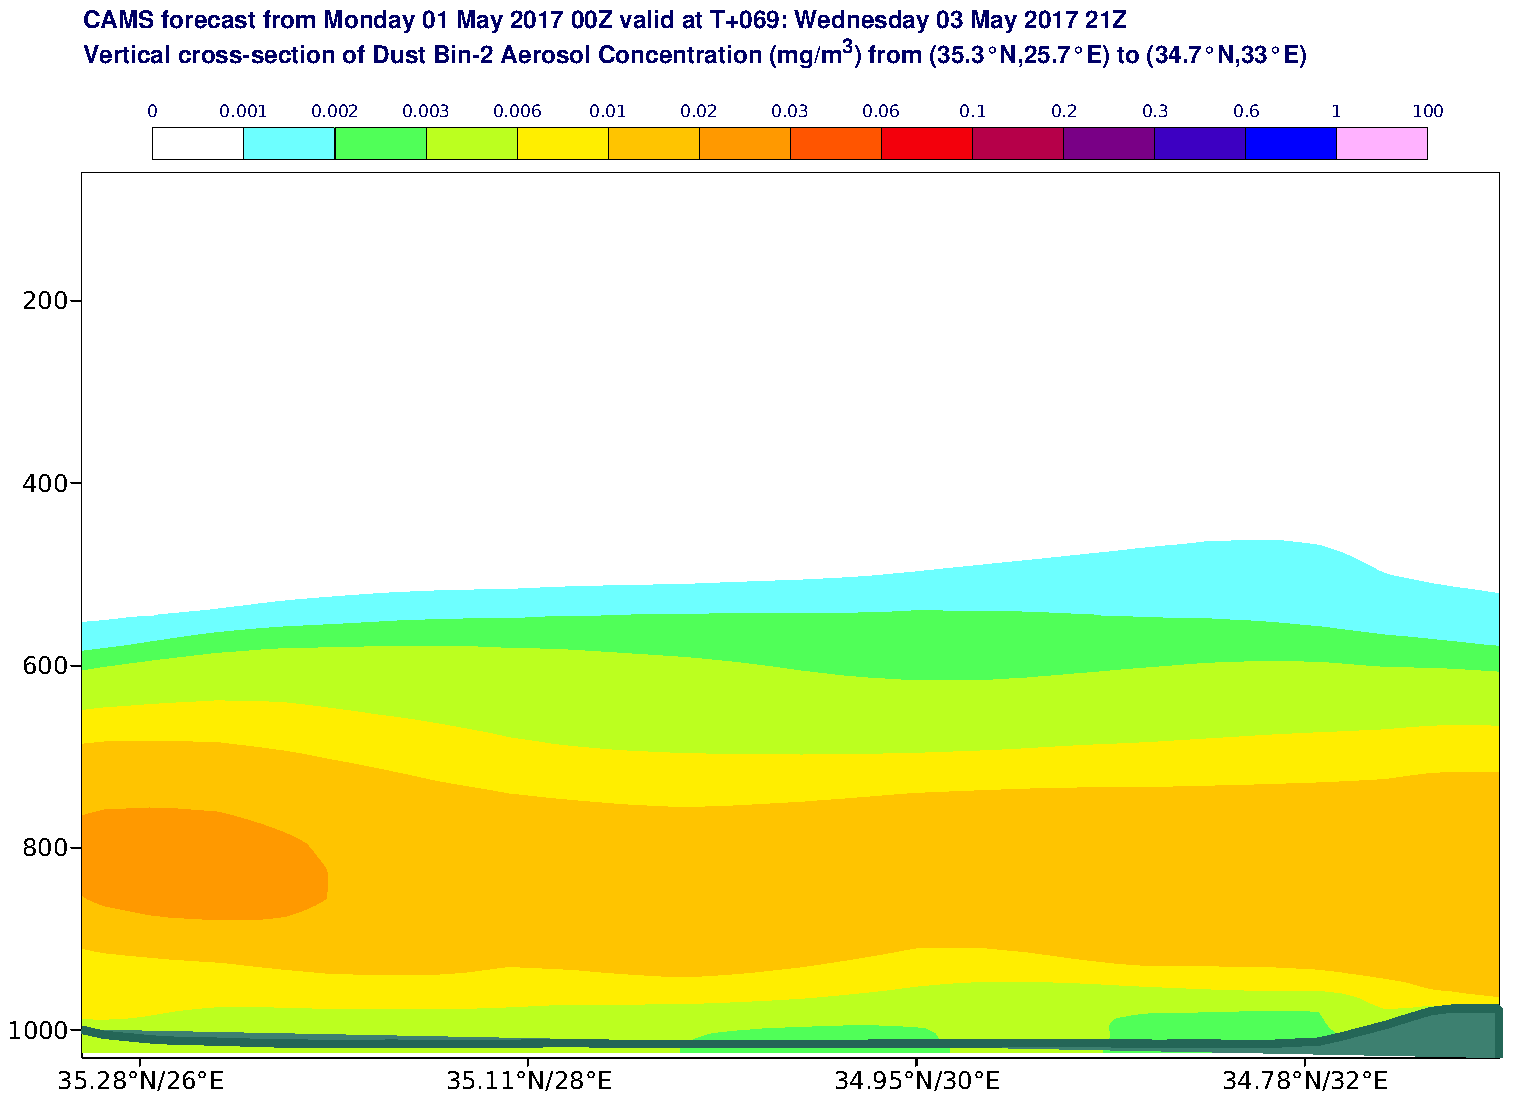 Vertical cross-section of Dust Bin-2 Aerosol Concentration (mg/m3) valid at T69 - 2017-05-03 21:00